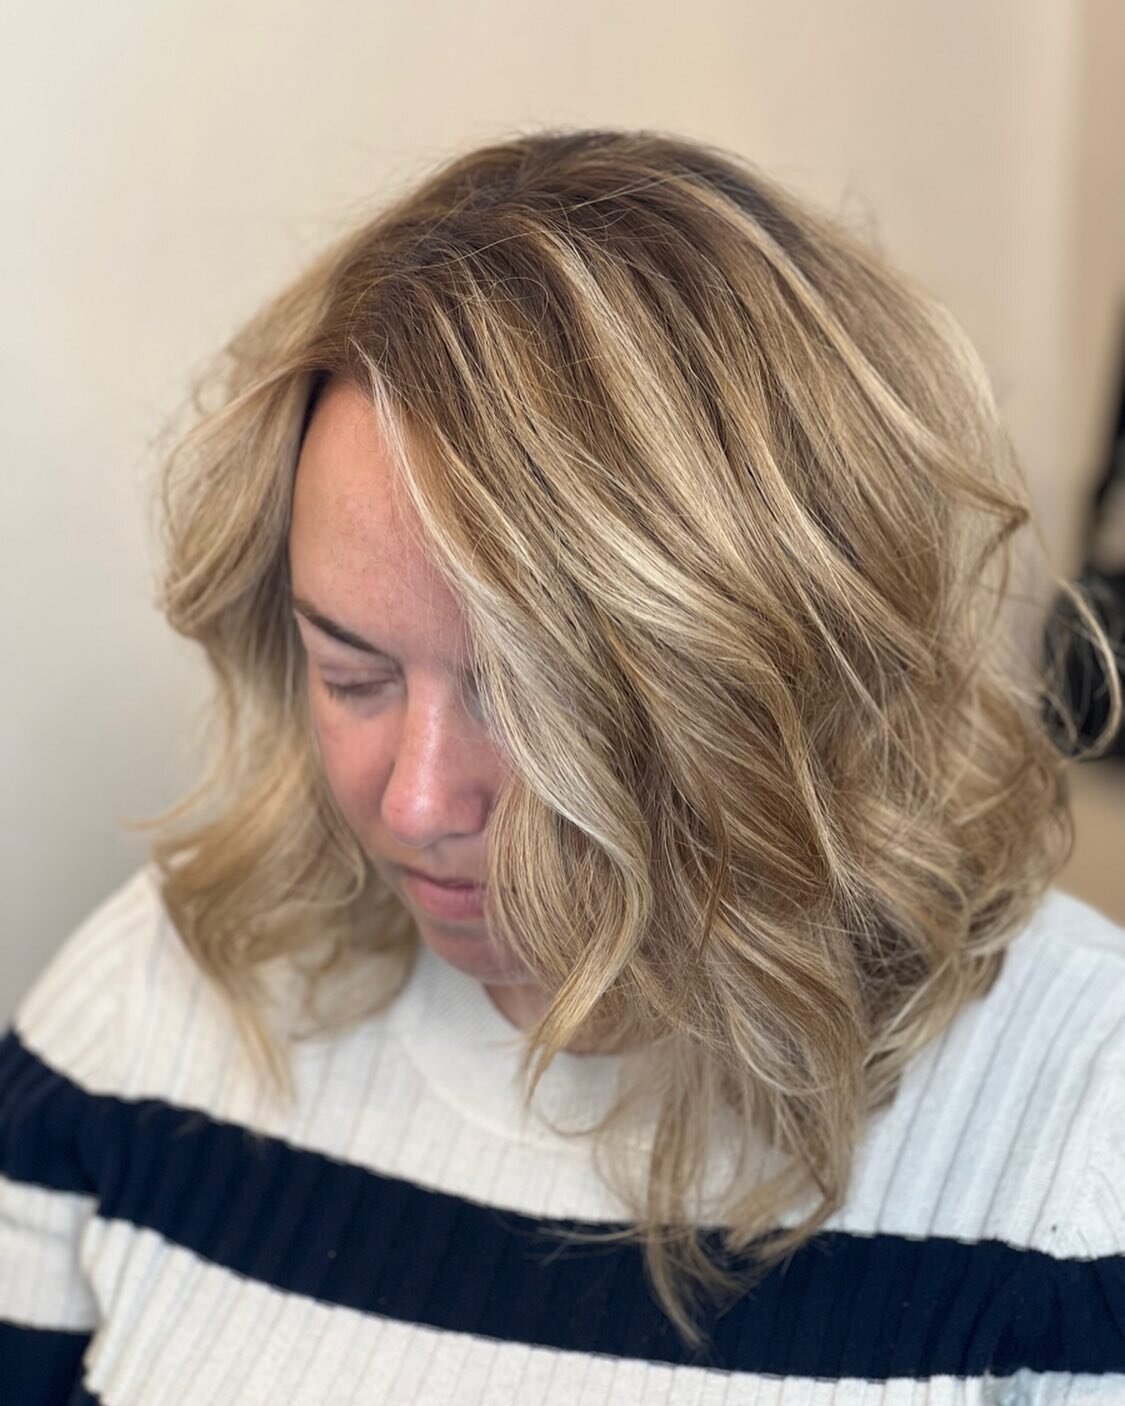 Full highlight, haircut and style by Samuel Mitchell @moondreamer 

#blonde #blondehair #chicagohairstylists #chicagohairsalon #chicagohair #kevinmurphy #milbon #difiabacolor #andersonville #northsidechicago #hairstylistofinstagram